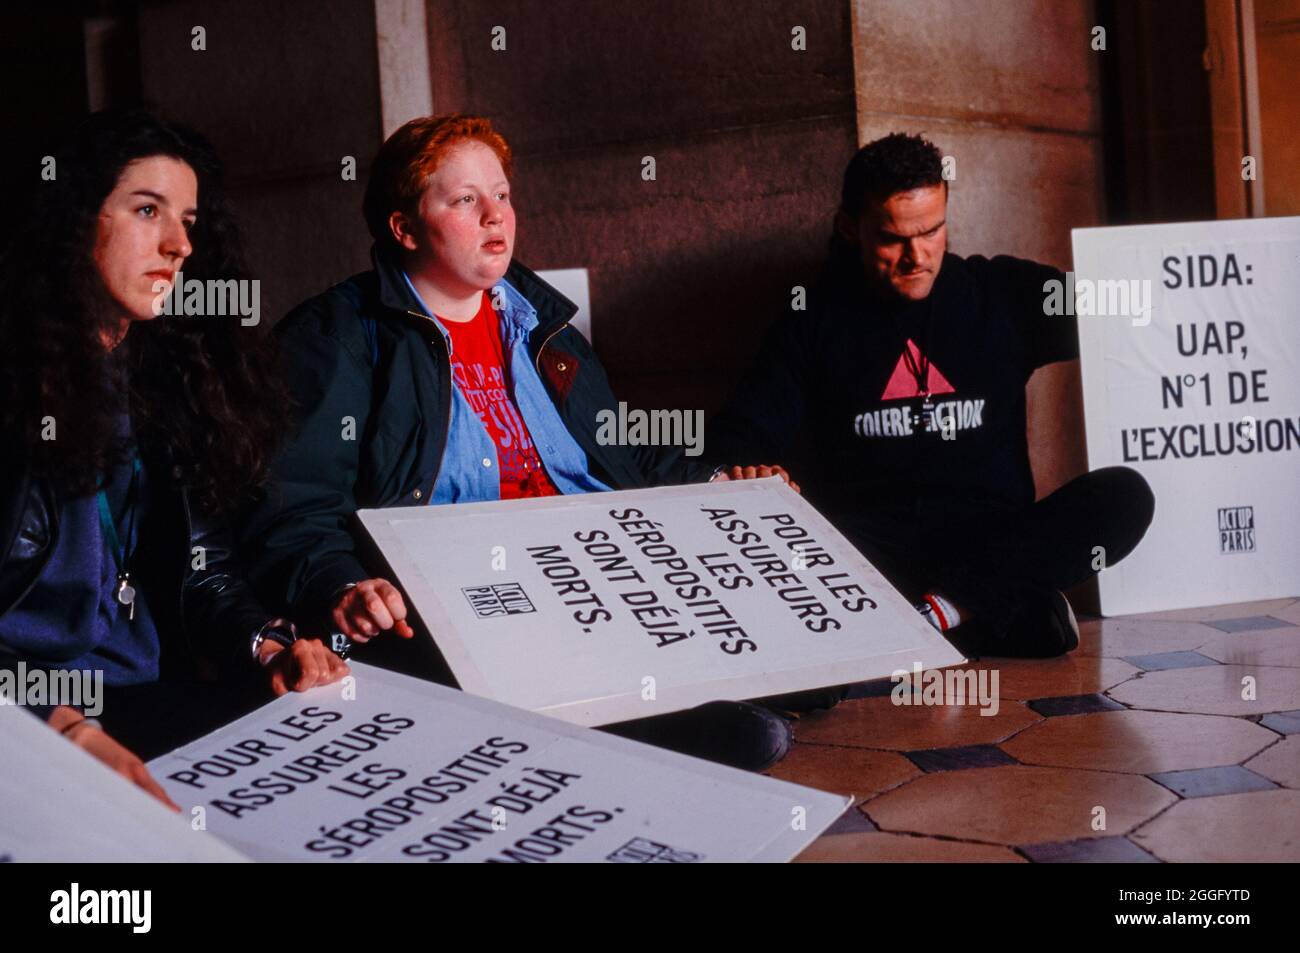 Act Up Paris Demonstration Against Discrimination by French Insurance Industry, Group of AIDS Activists blocking ENtrance in Lobby Holding Protest Signs, young activism, anti discrimination, activist girls, young lesbians 1990s women Stock Photo